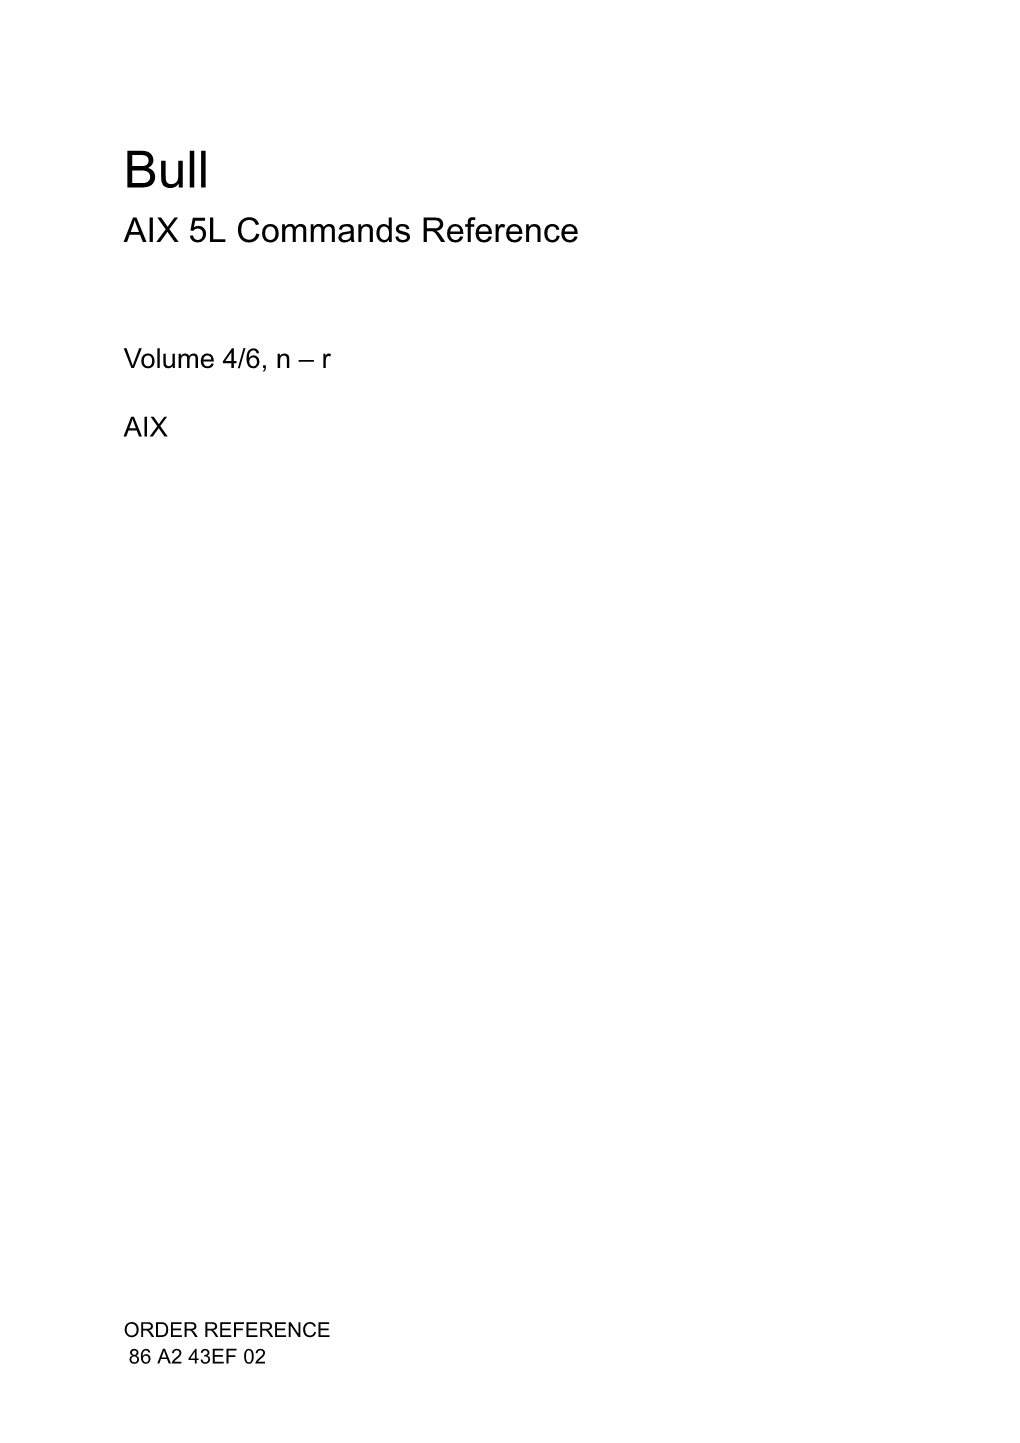 Commands Reference, Volume 4 Panel20 Command